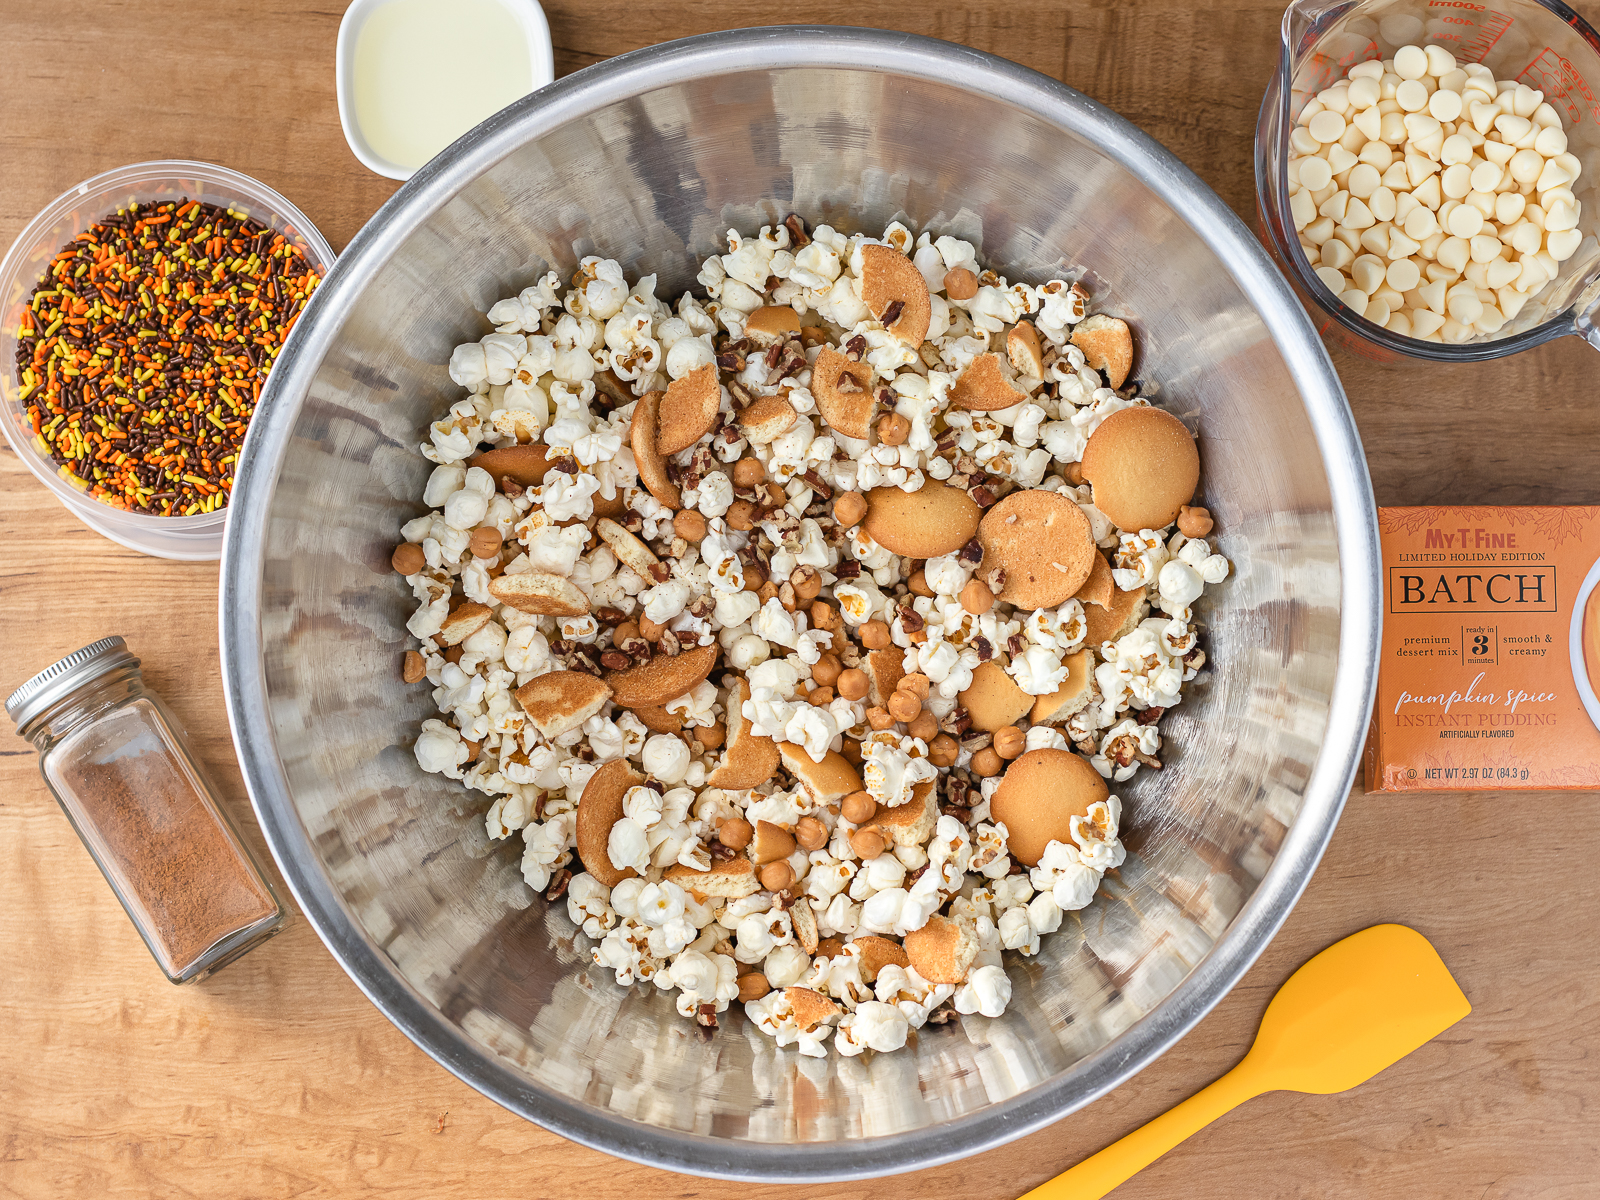 Big bowl of plain popcorn, pecans, caramel bits, and vanilla wafer cookies. Remaining ingredients for the coating on the side.